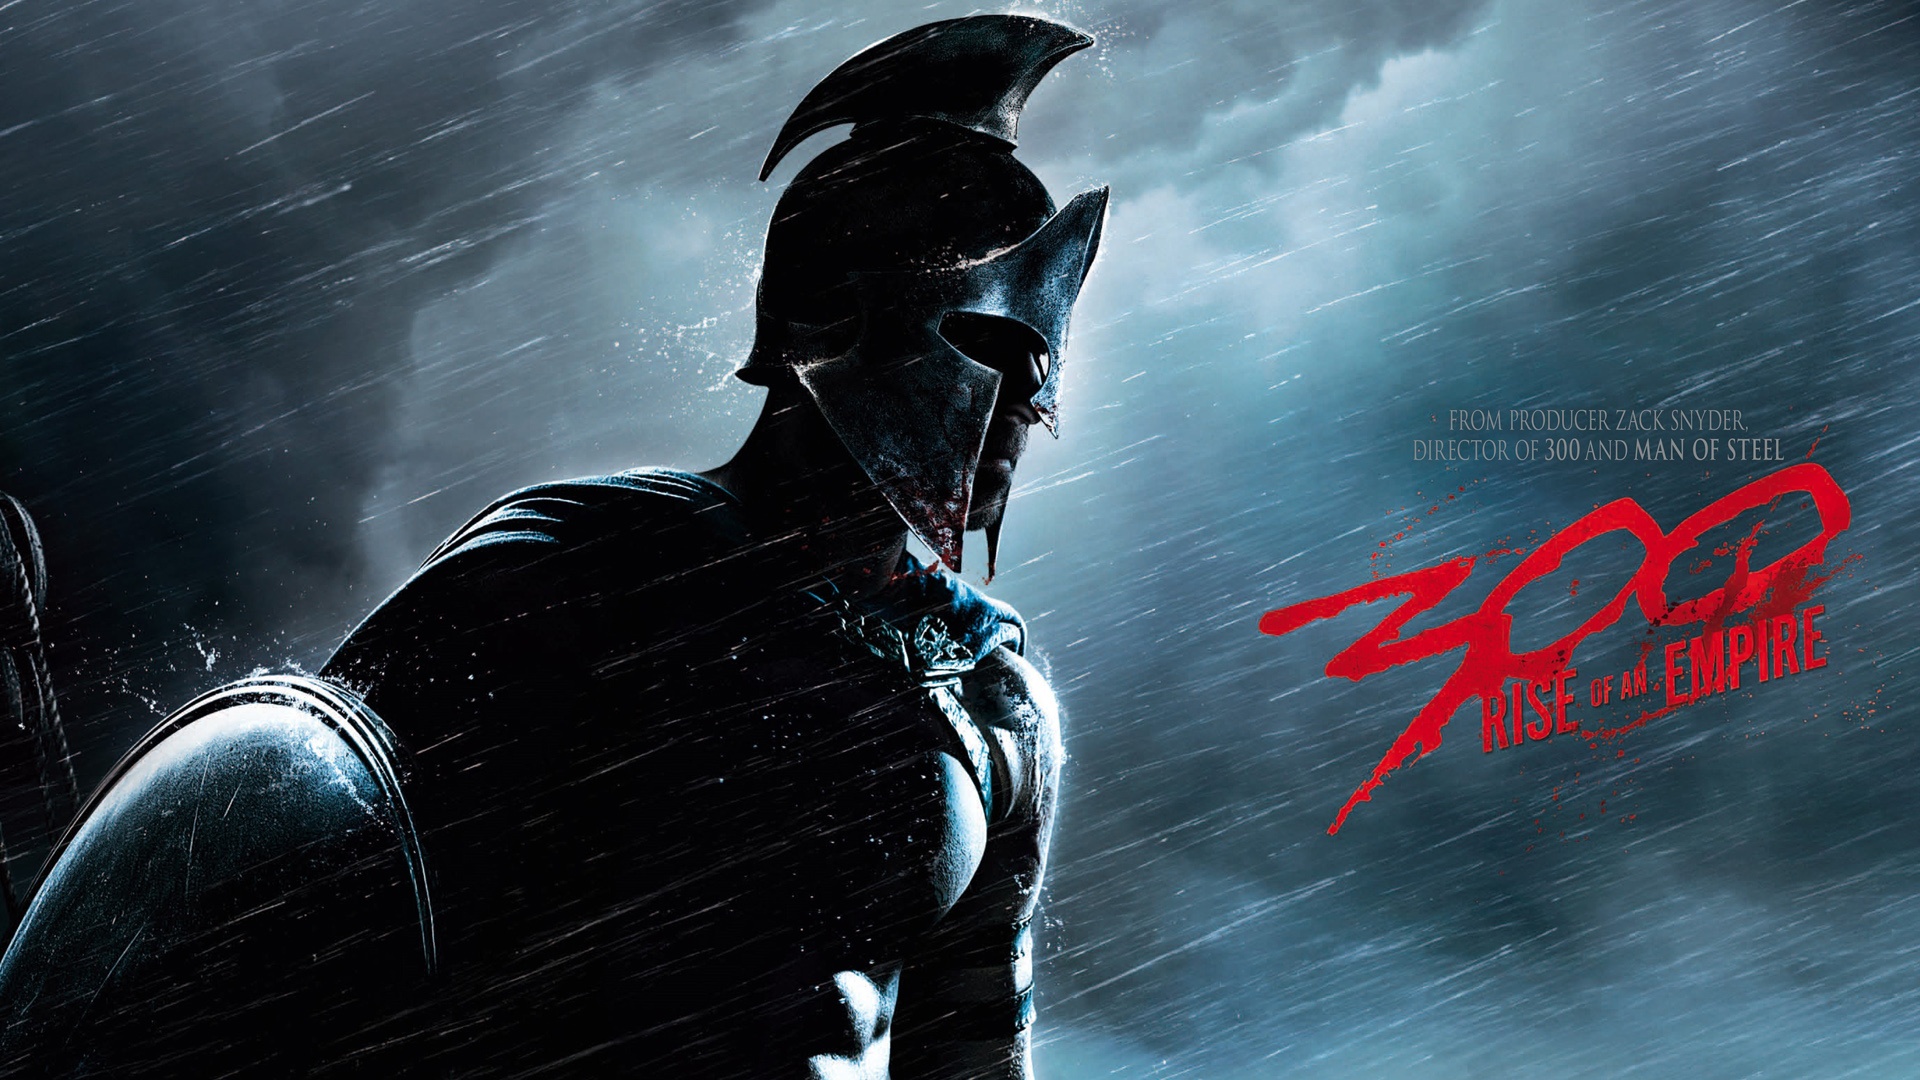 Film review: 300: Rise of an Empire